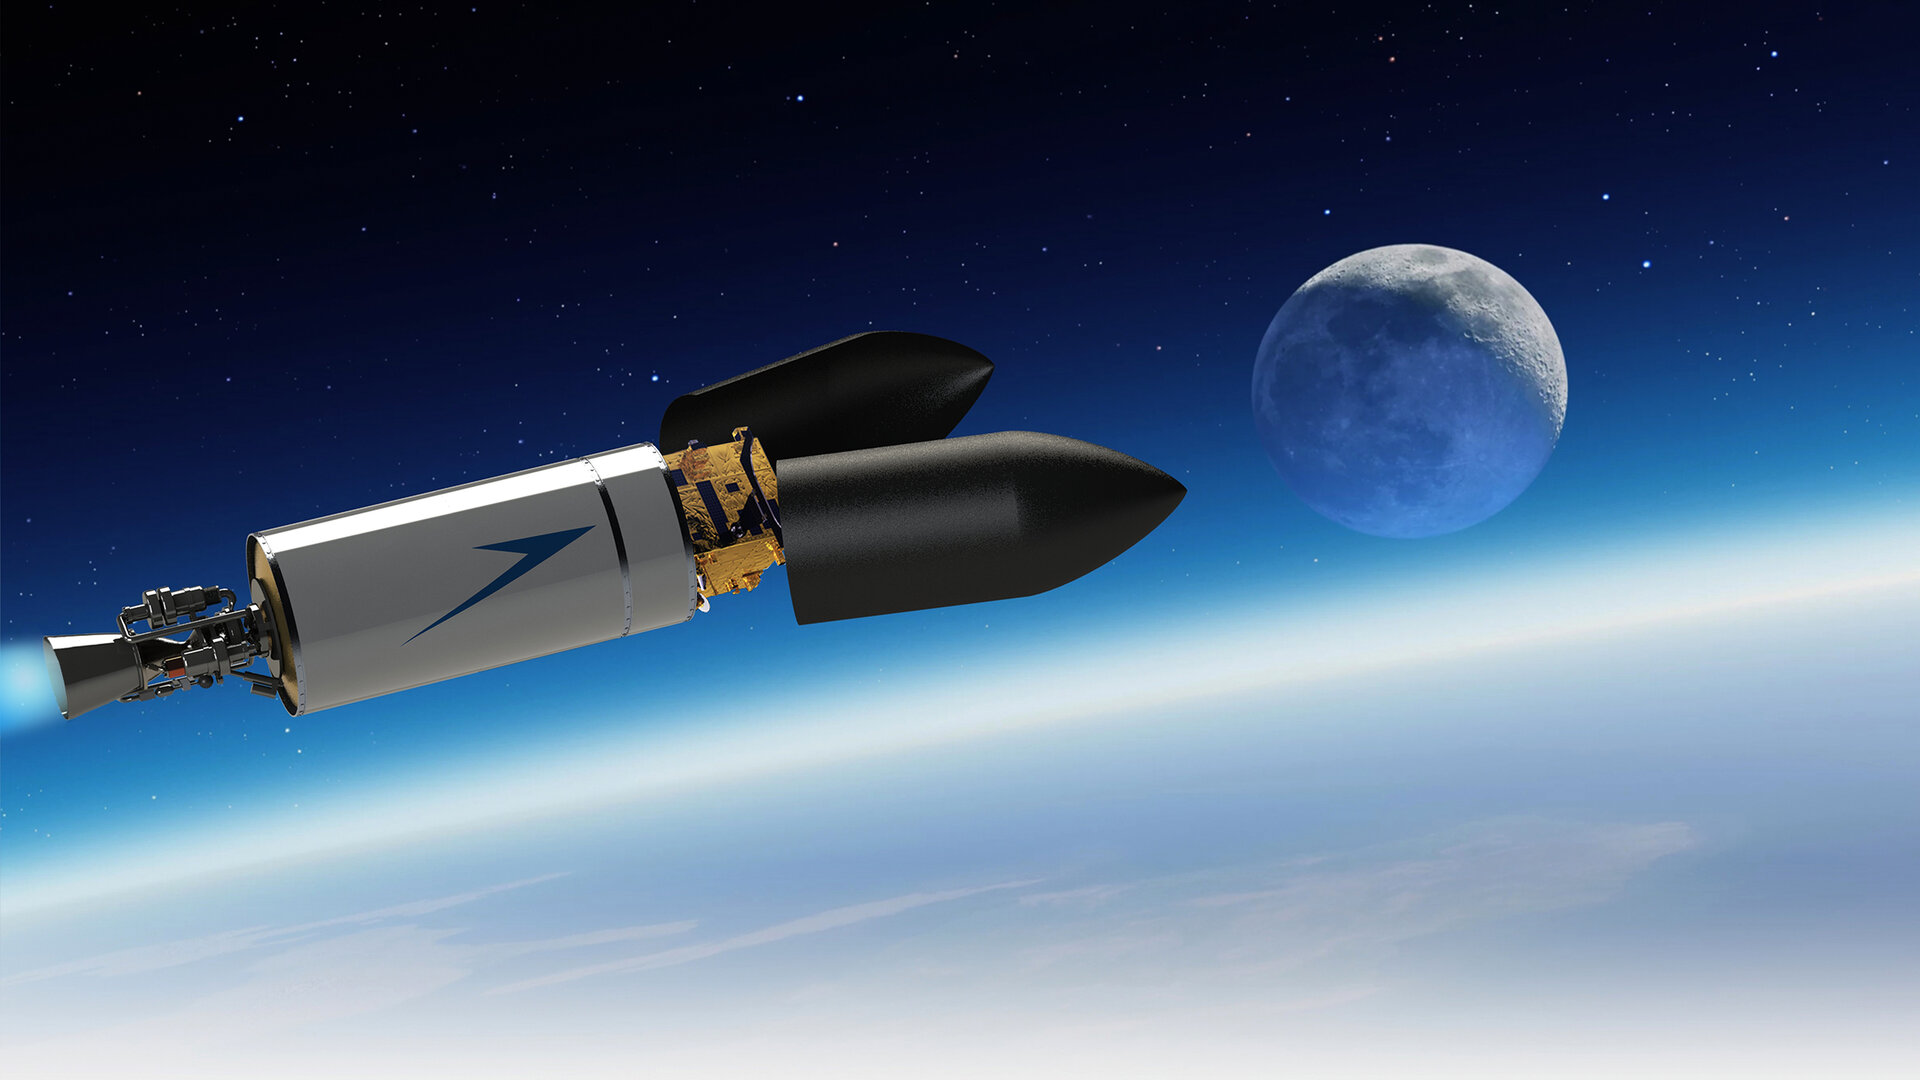 Isar Aerospace and Orbex Space Raise Funds for Small Launch Vehicle Development